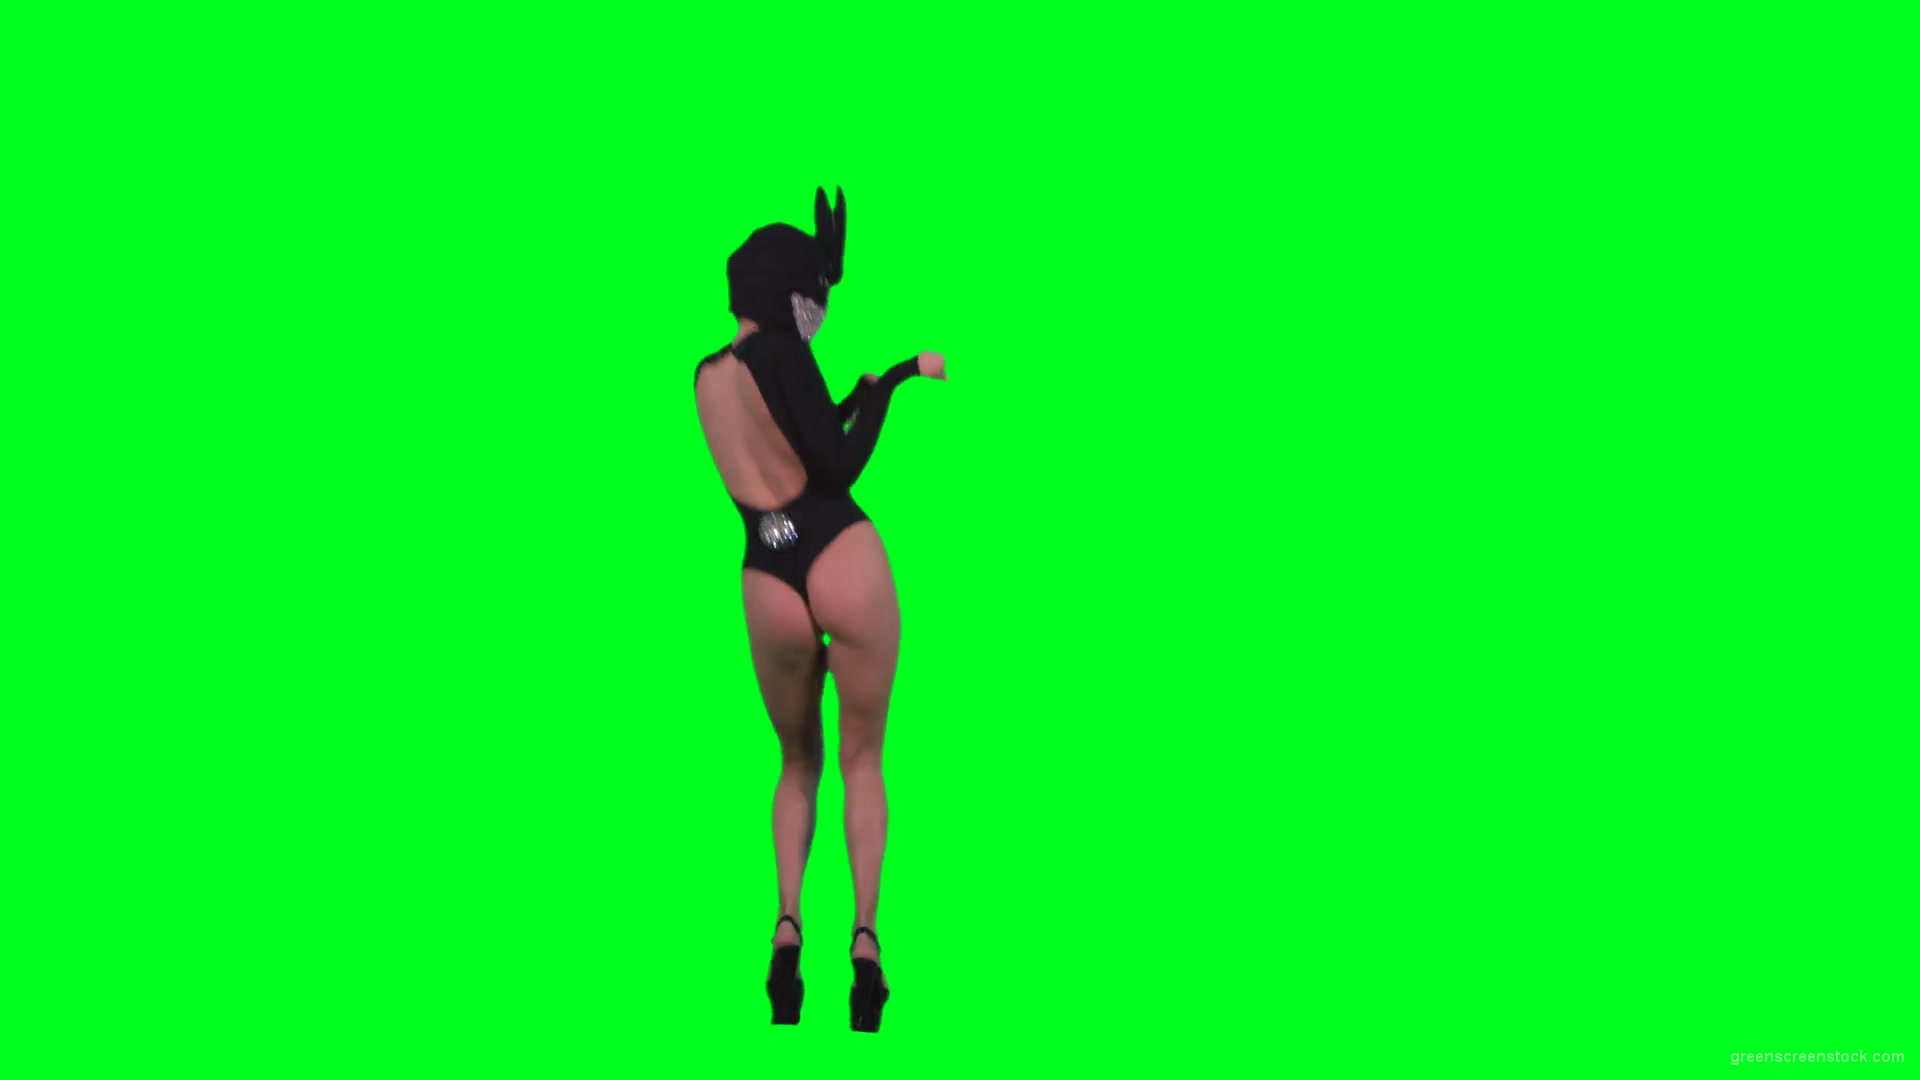 Black-Occult-Banny-Rabbit-dancing-girl-jumping-isolated-on-green-screen-4K-Video-Footage-1920_007 Green Screen Stock